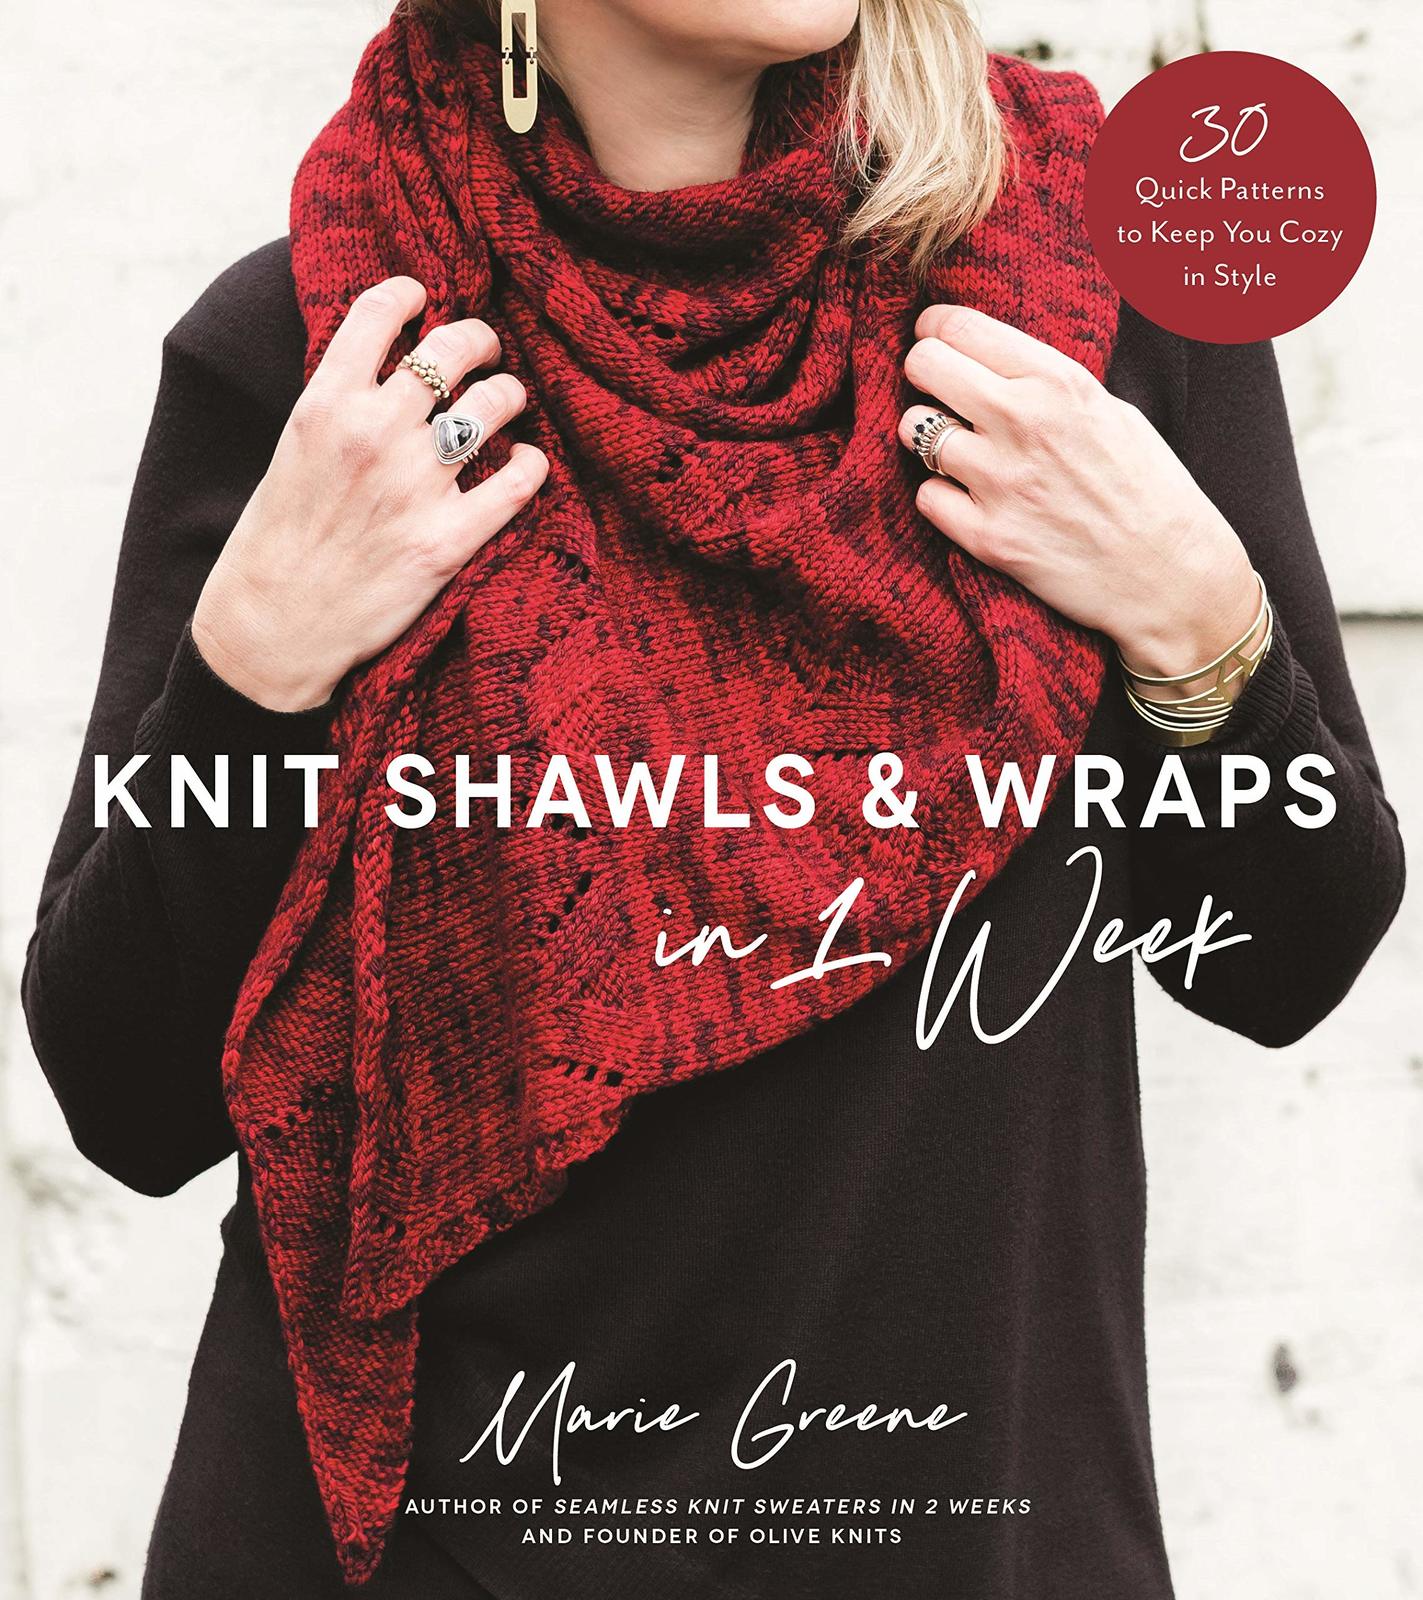 Primary image for Knit Shawls & Wraps in 1 Week: 30 Quick Patterns to Keep You Cozy in Style [Pape